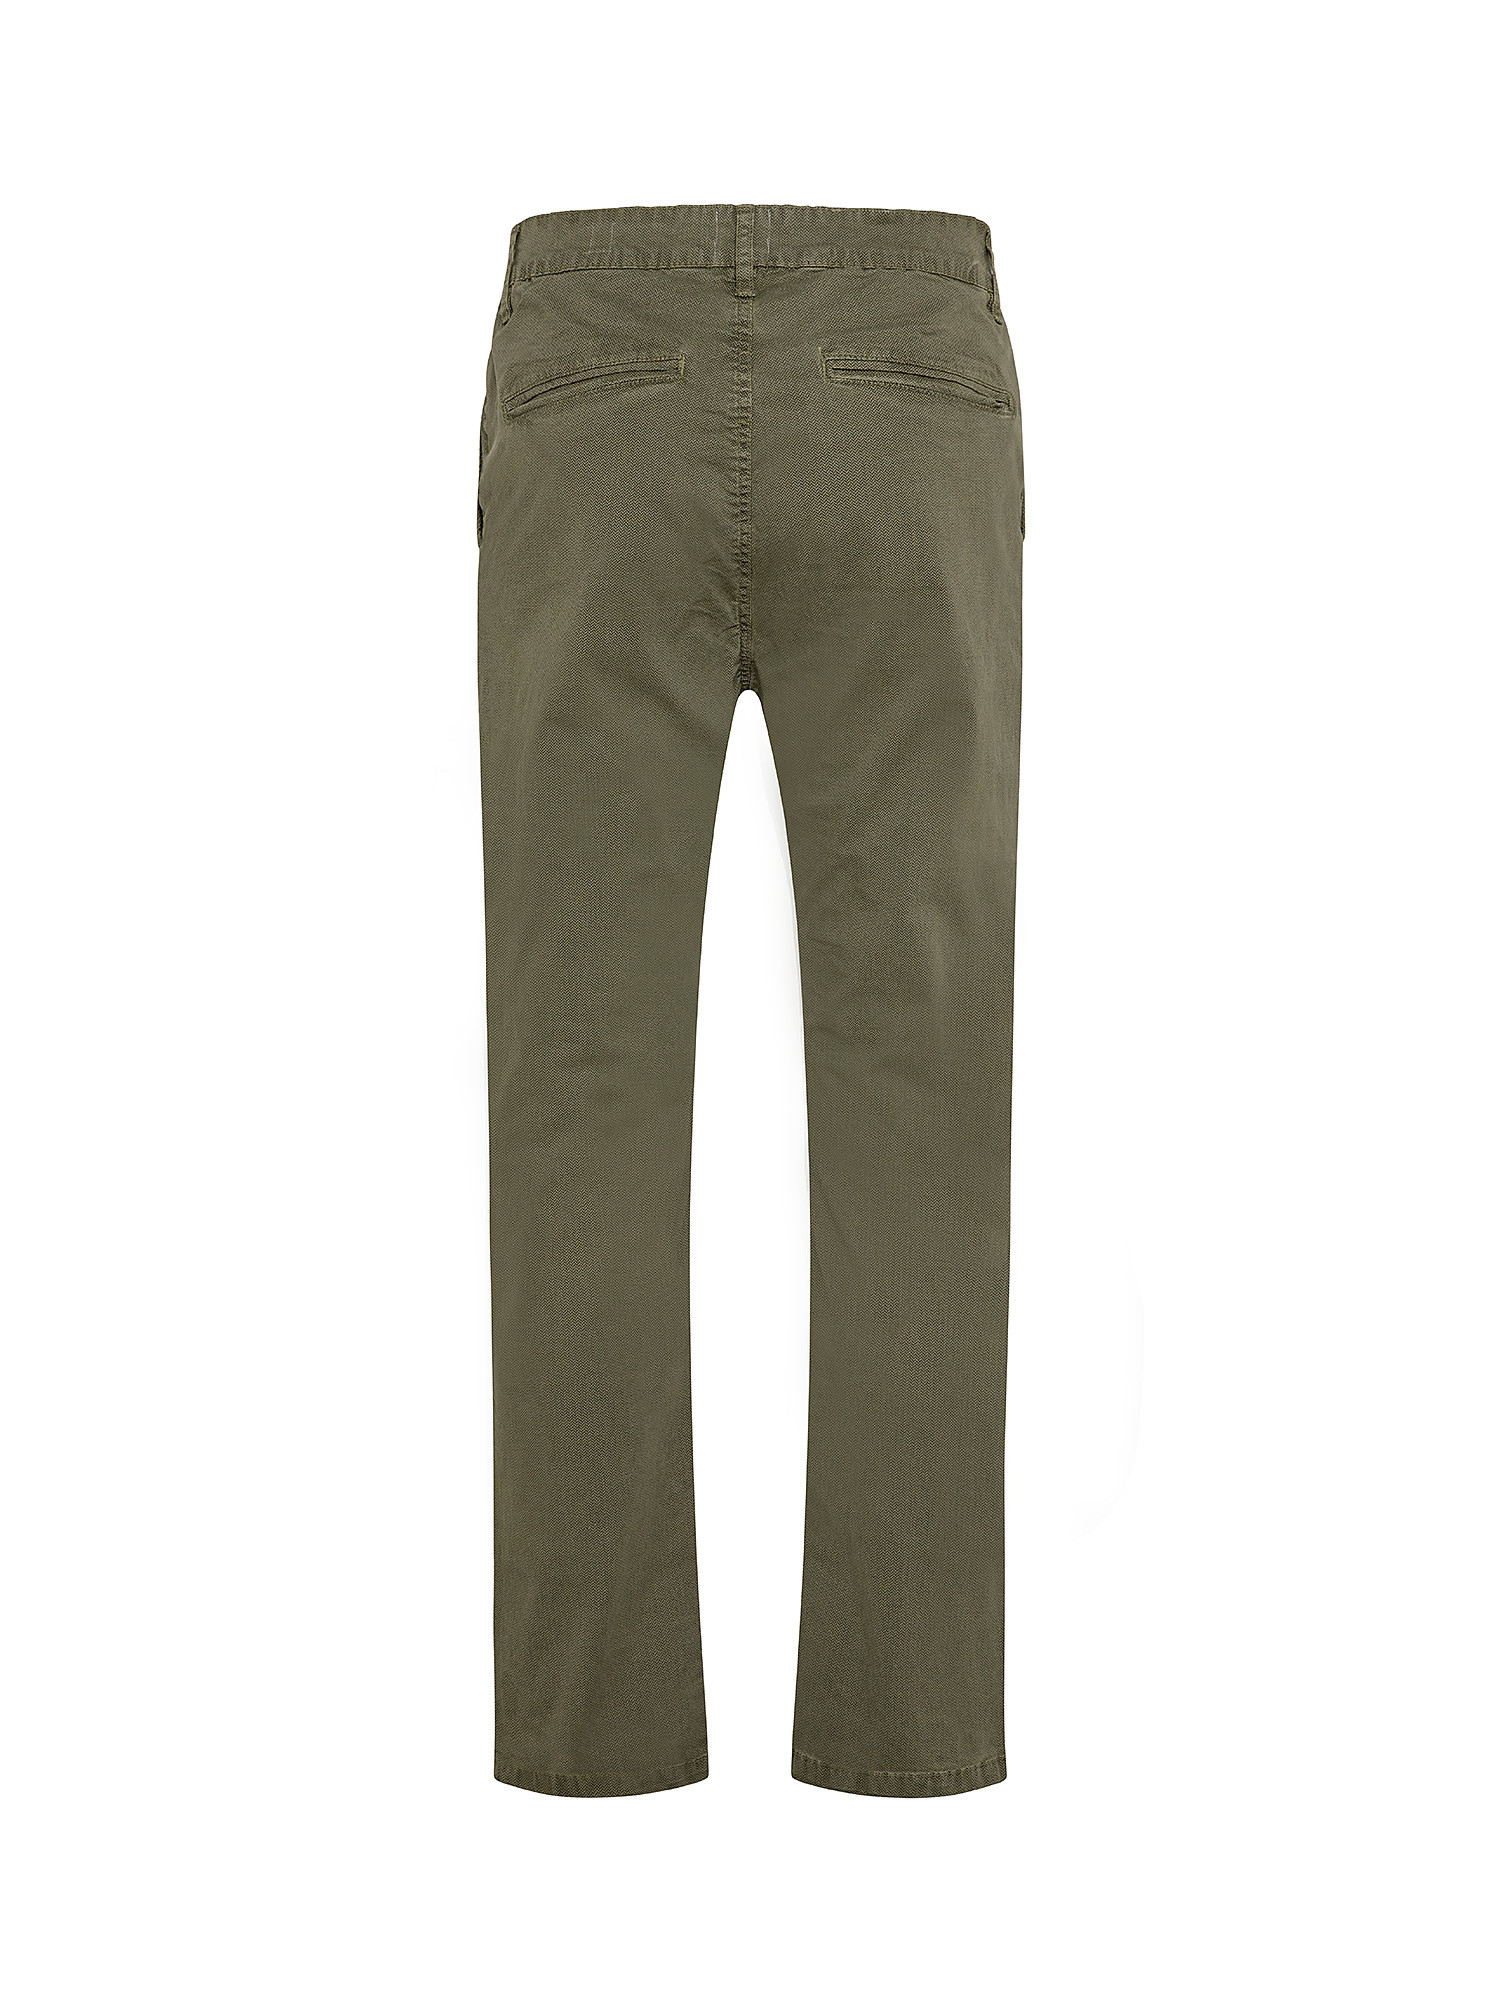 Pantalone chinos cotone stretch, Verde, large image number 1